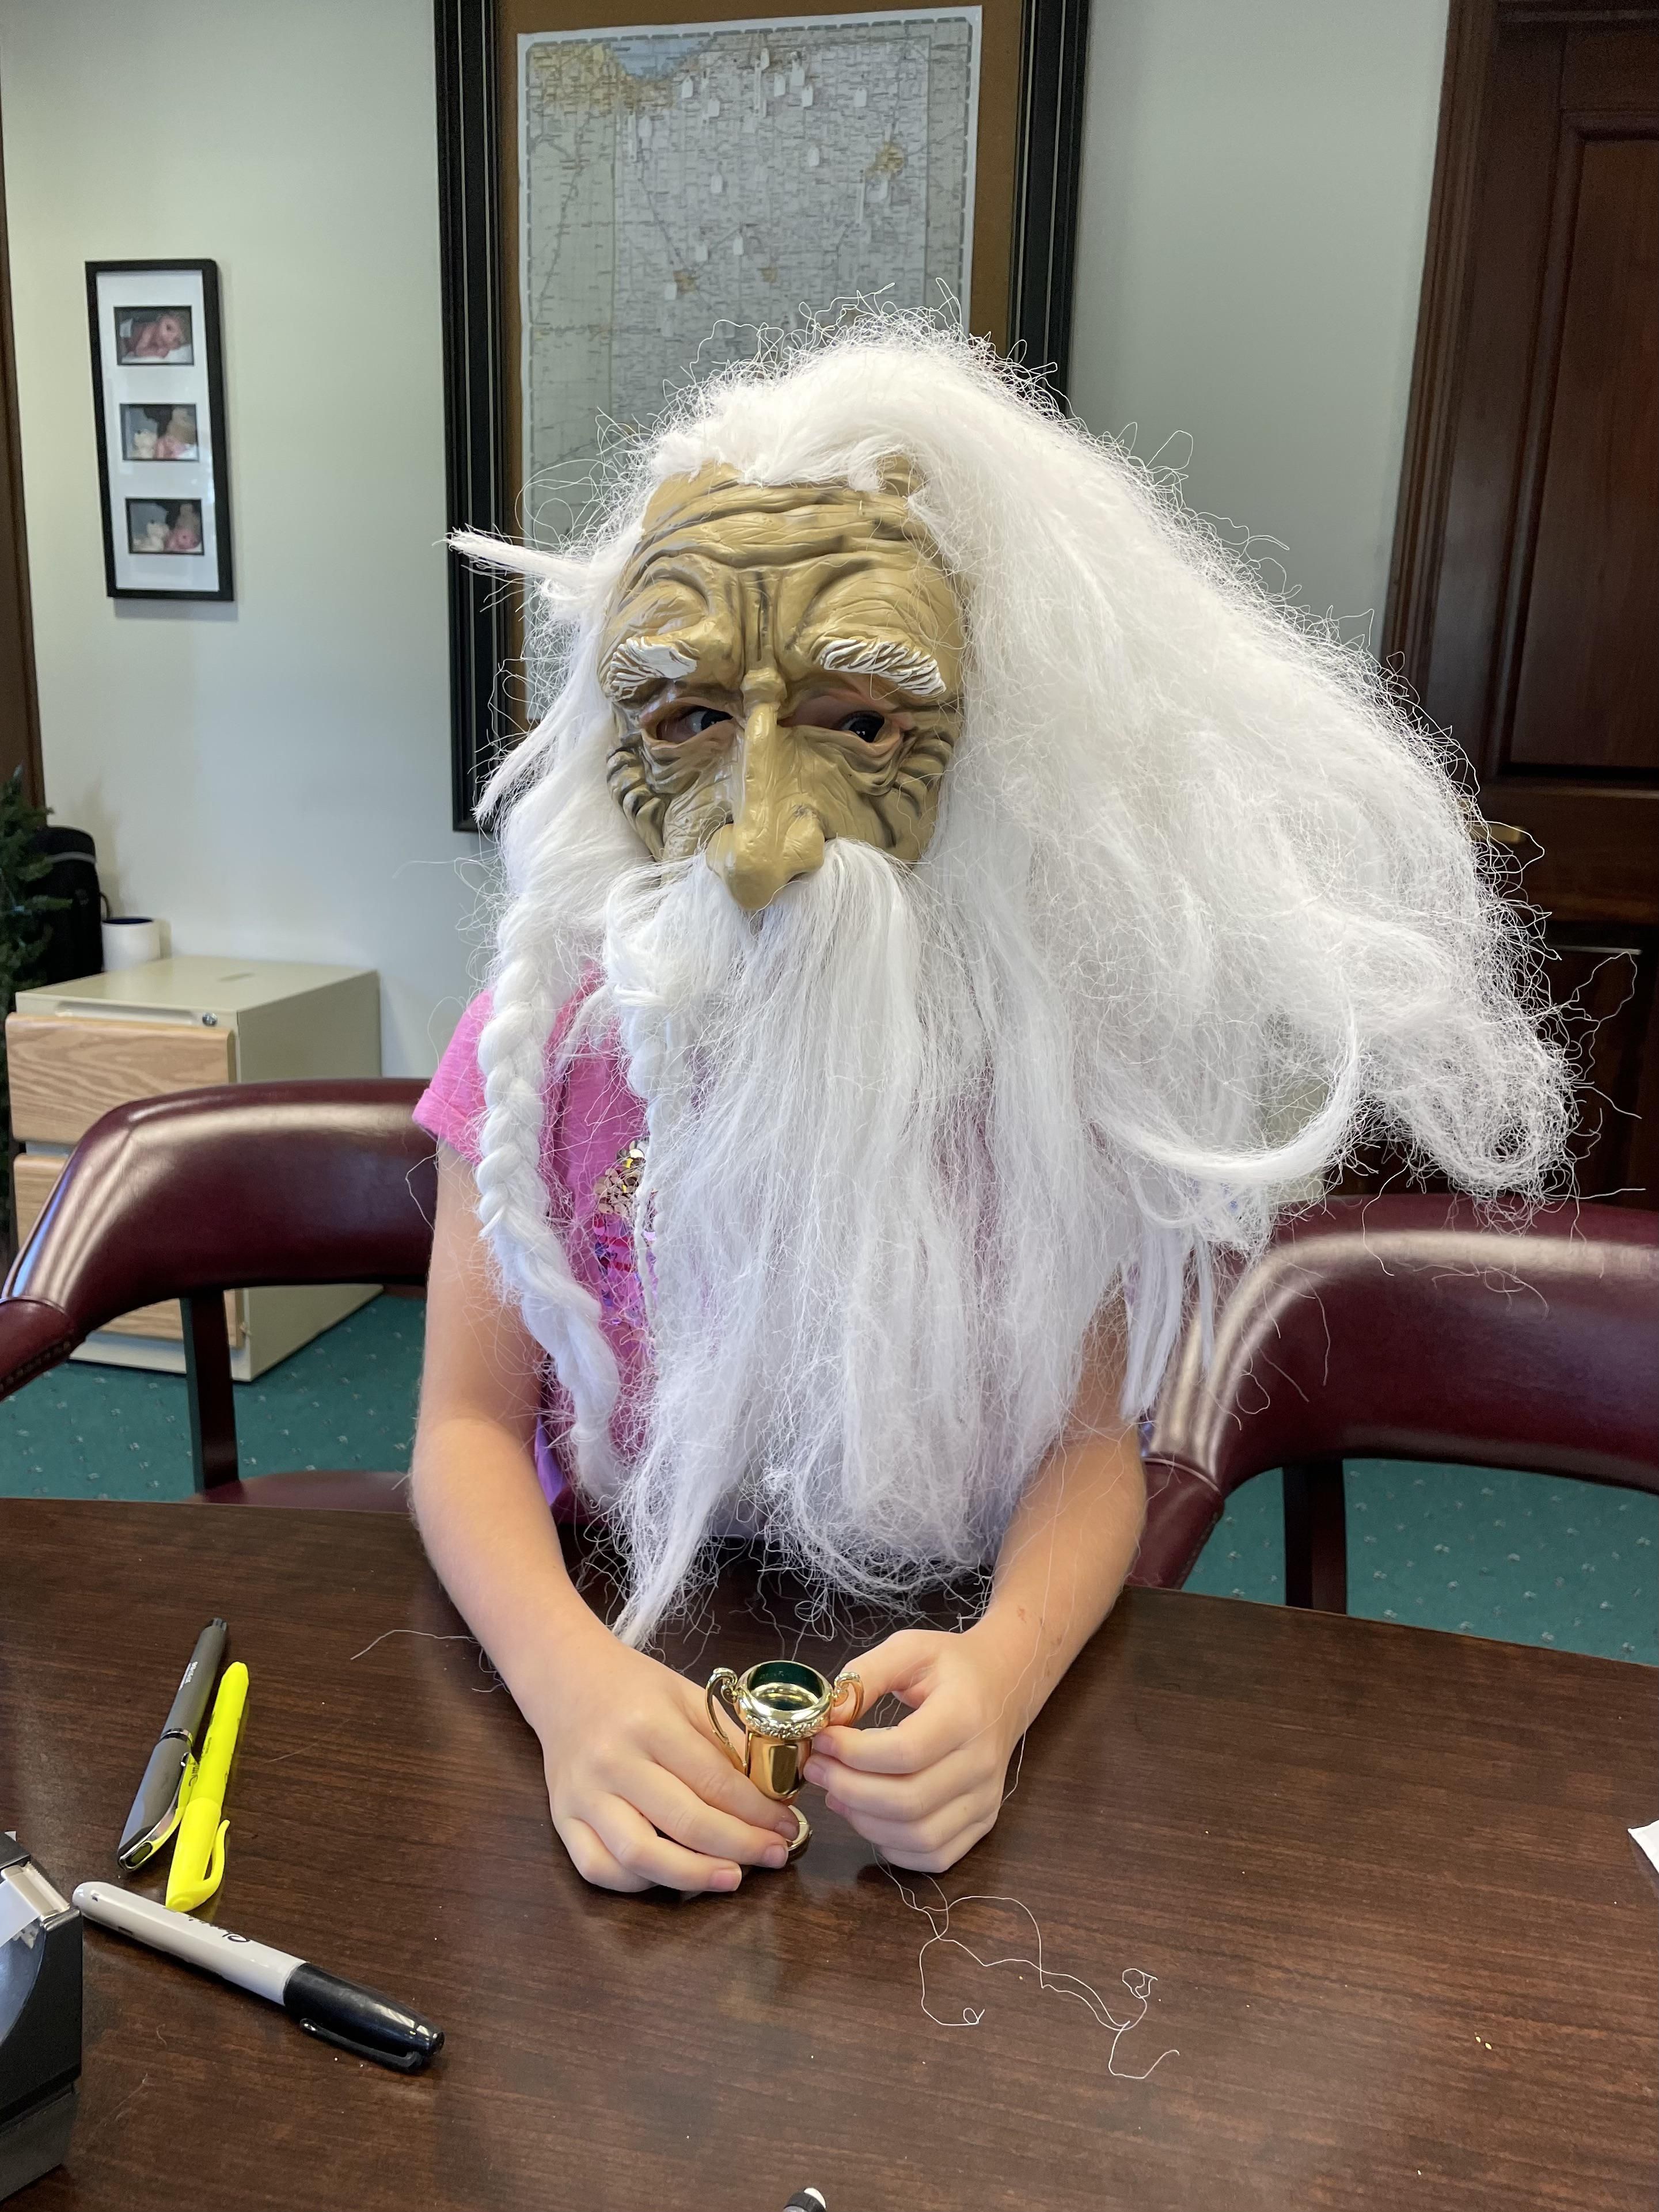 Took my daughter to work. She found this mask in a prop drawer. Not much work was done that day.